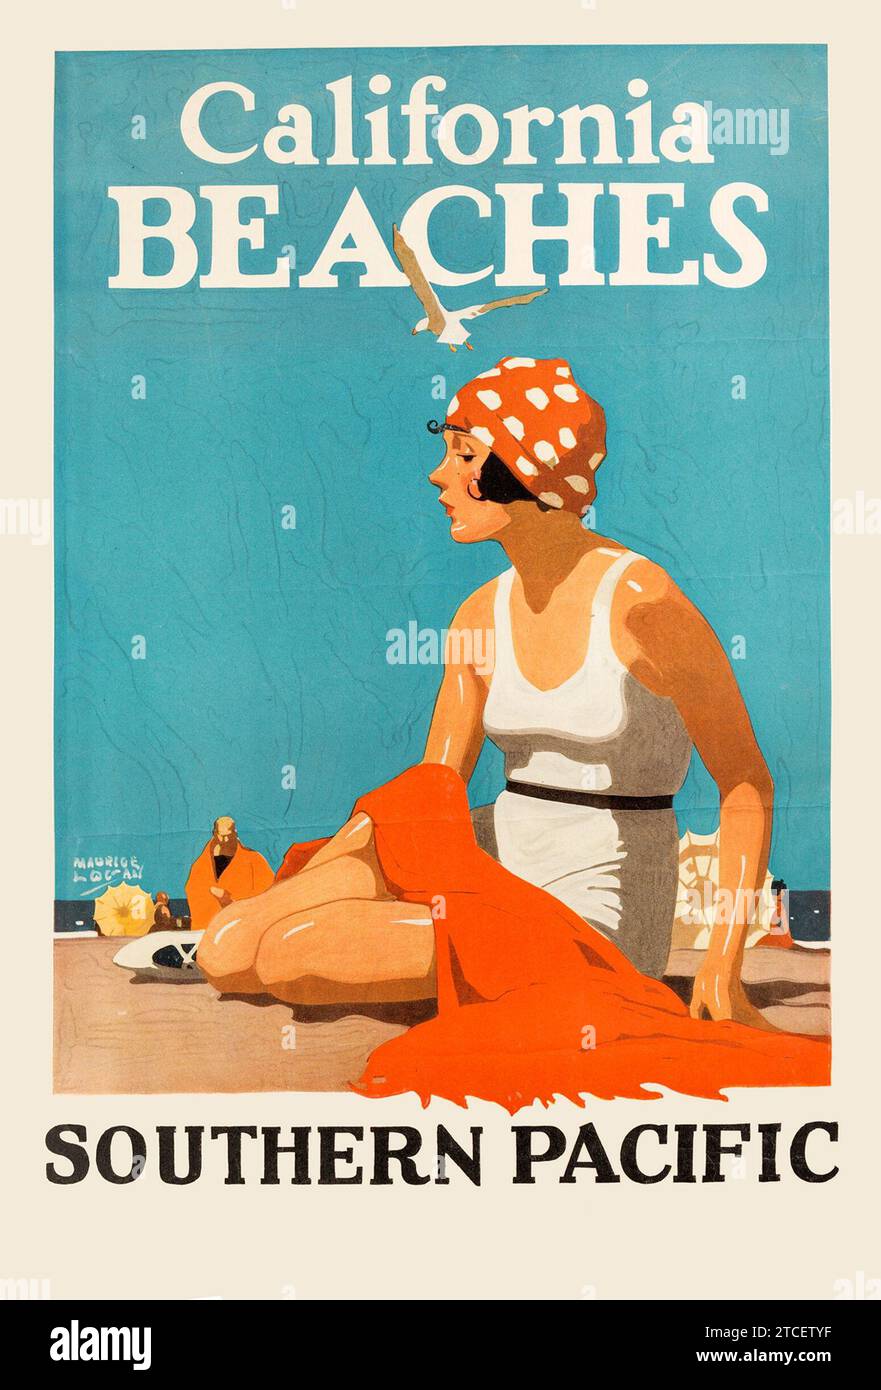 California Beaches - California Railroad Travel Poster, Southern Pacific, 1920s Woman on the Beach - Artwork by Maurice Logan Banque D'Images